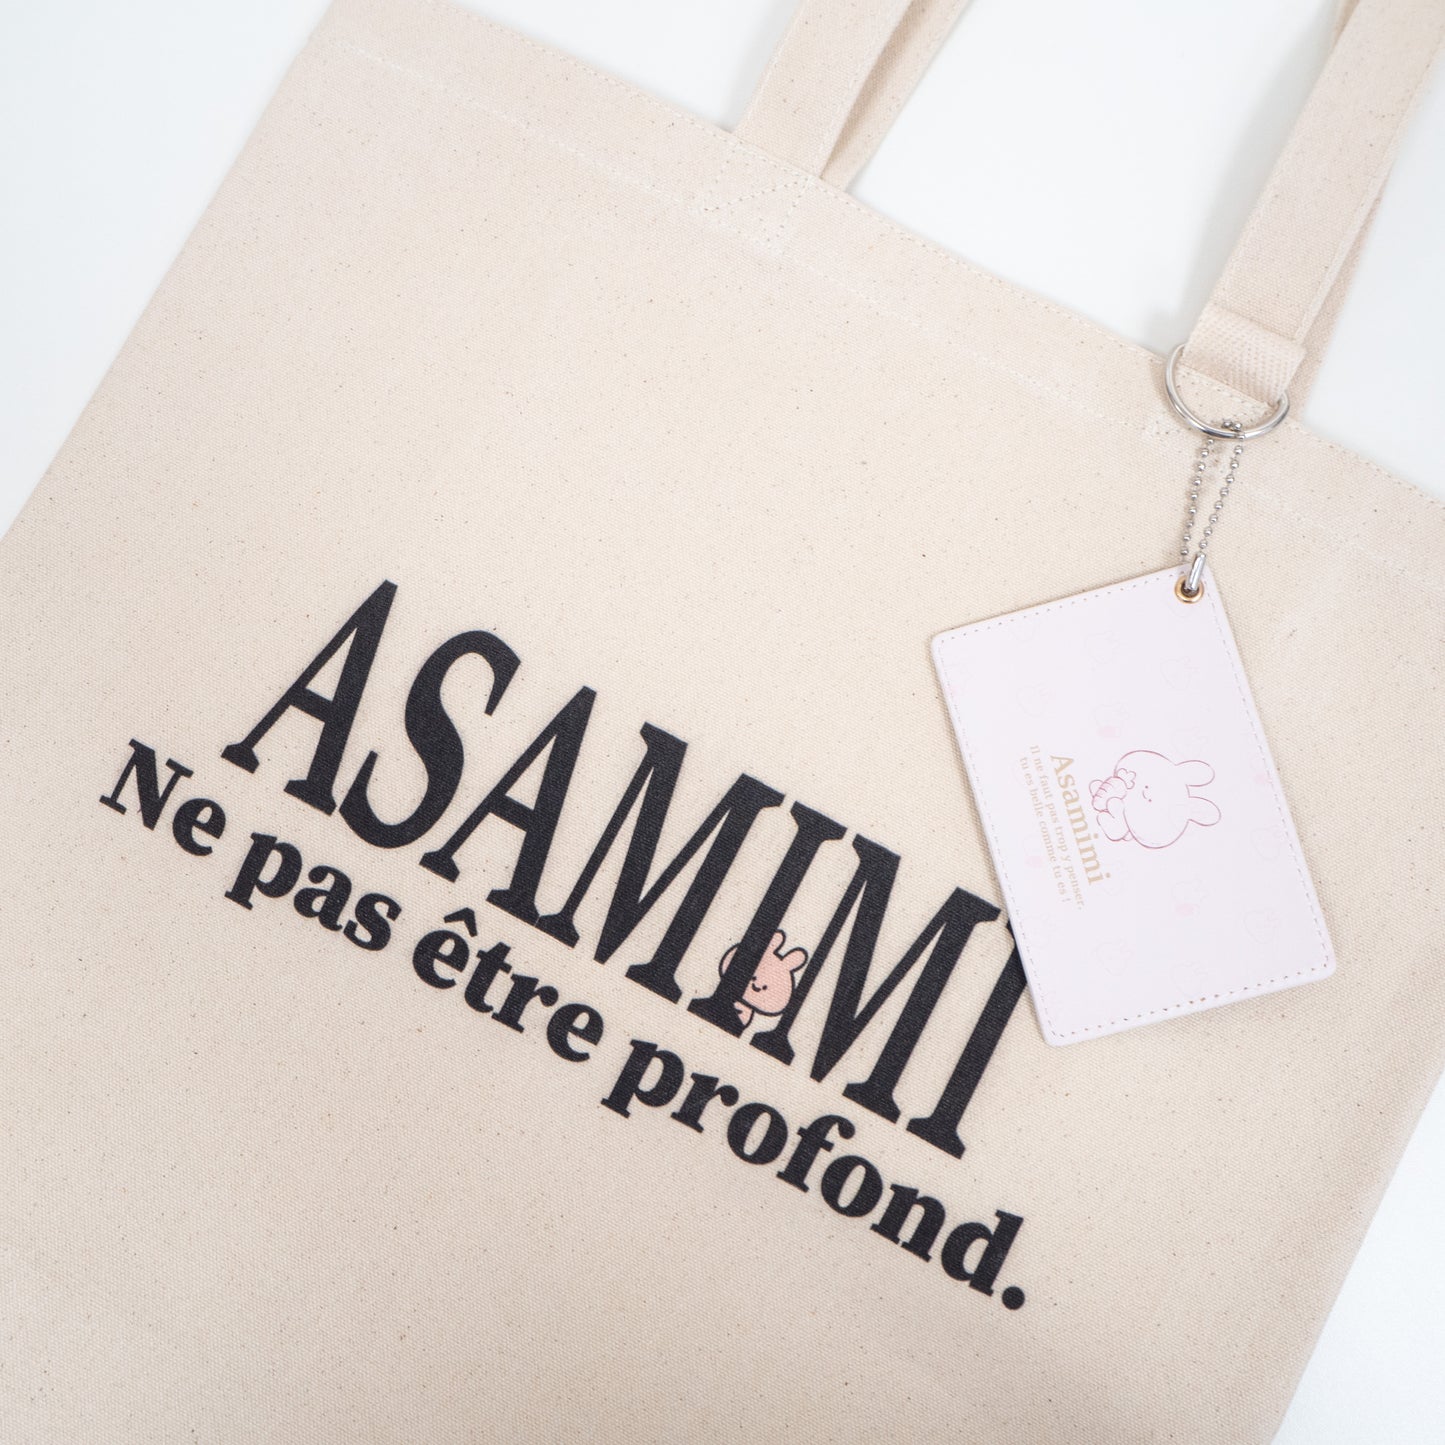 [Asamimi-chan] Tote bag (French girly) [shipped in early December]